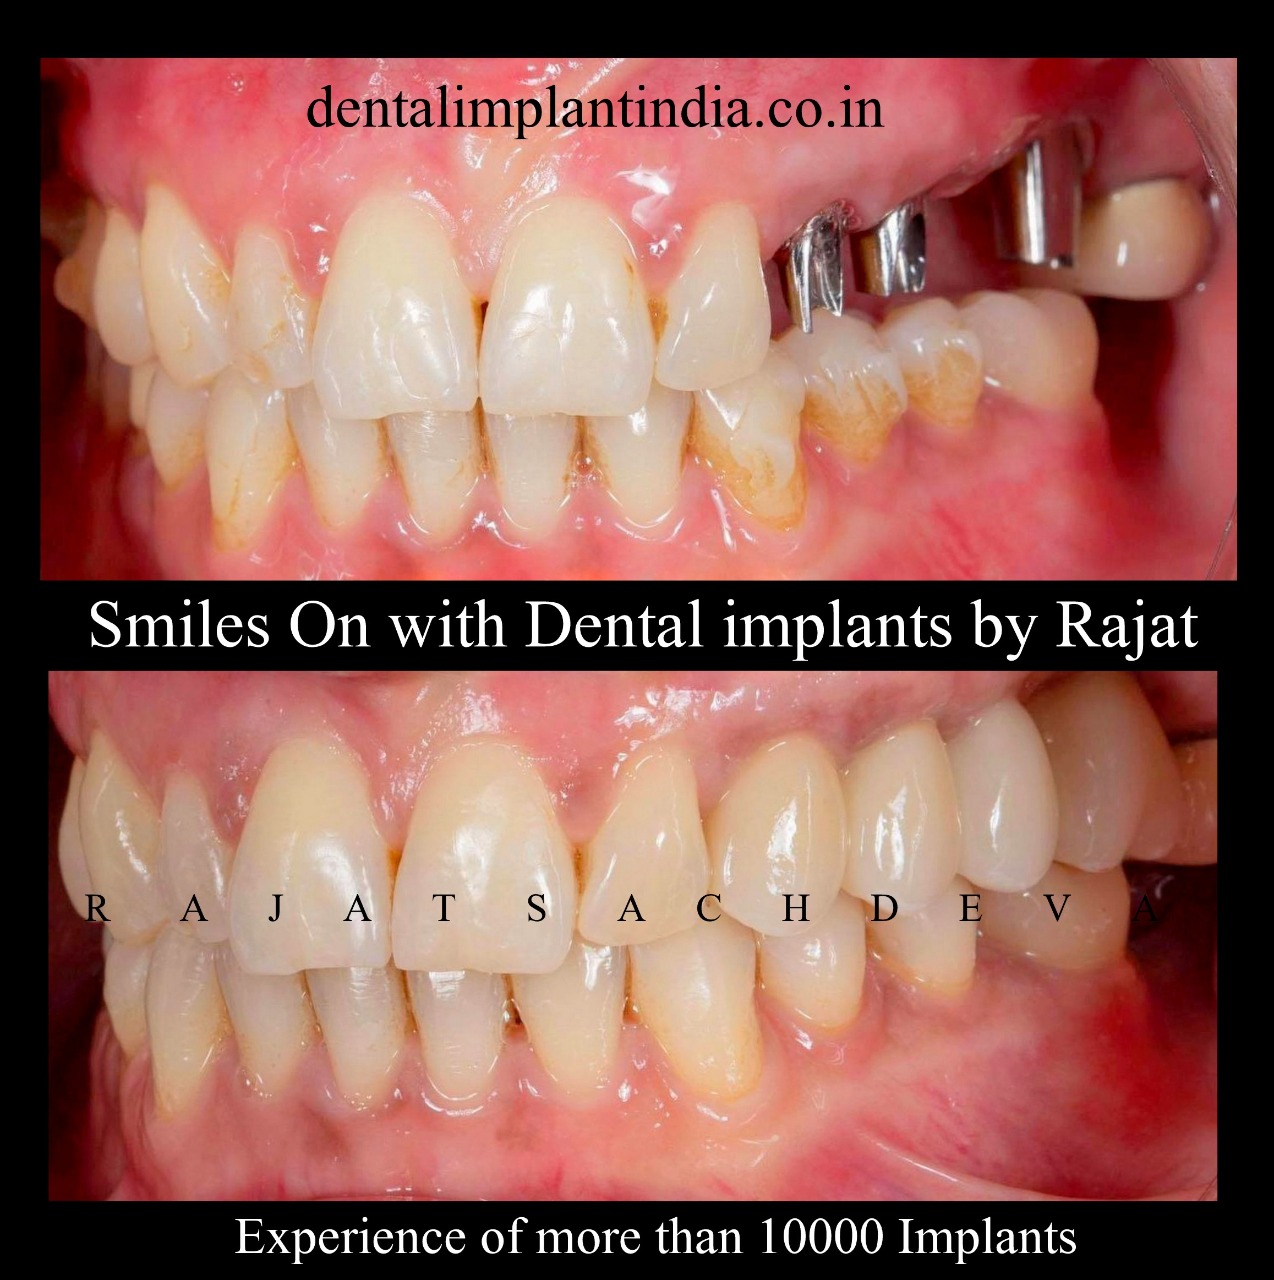 dental implants course objective